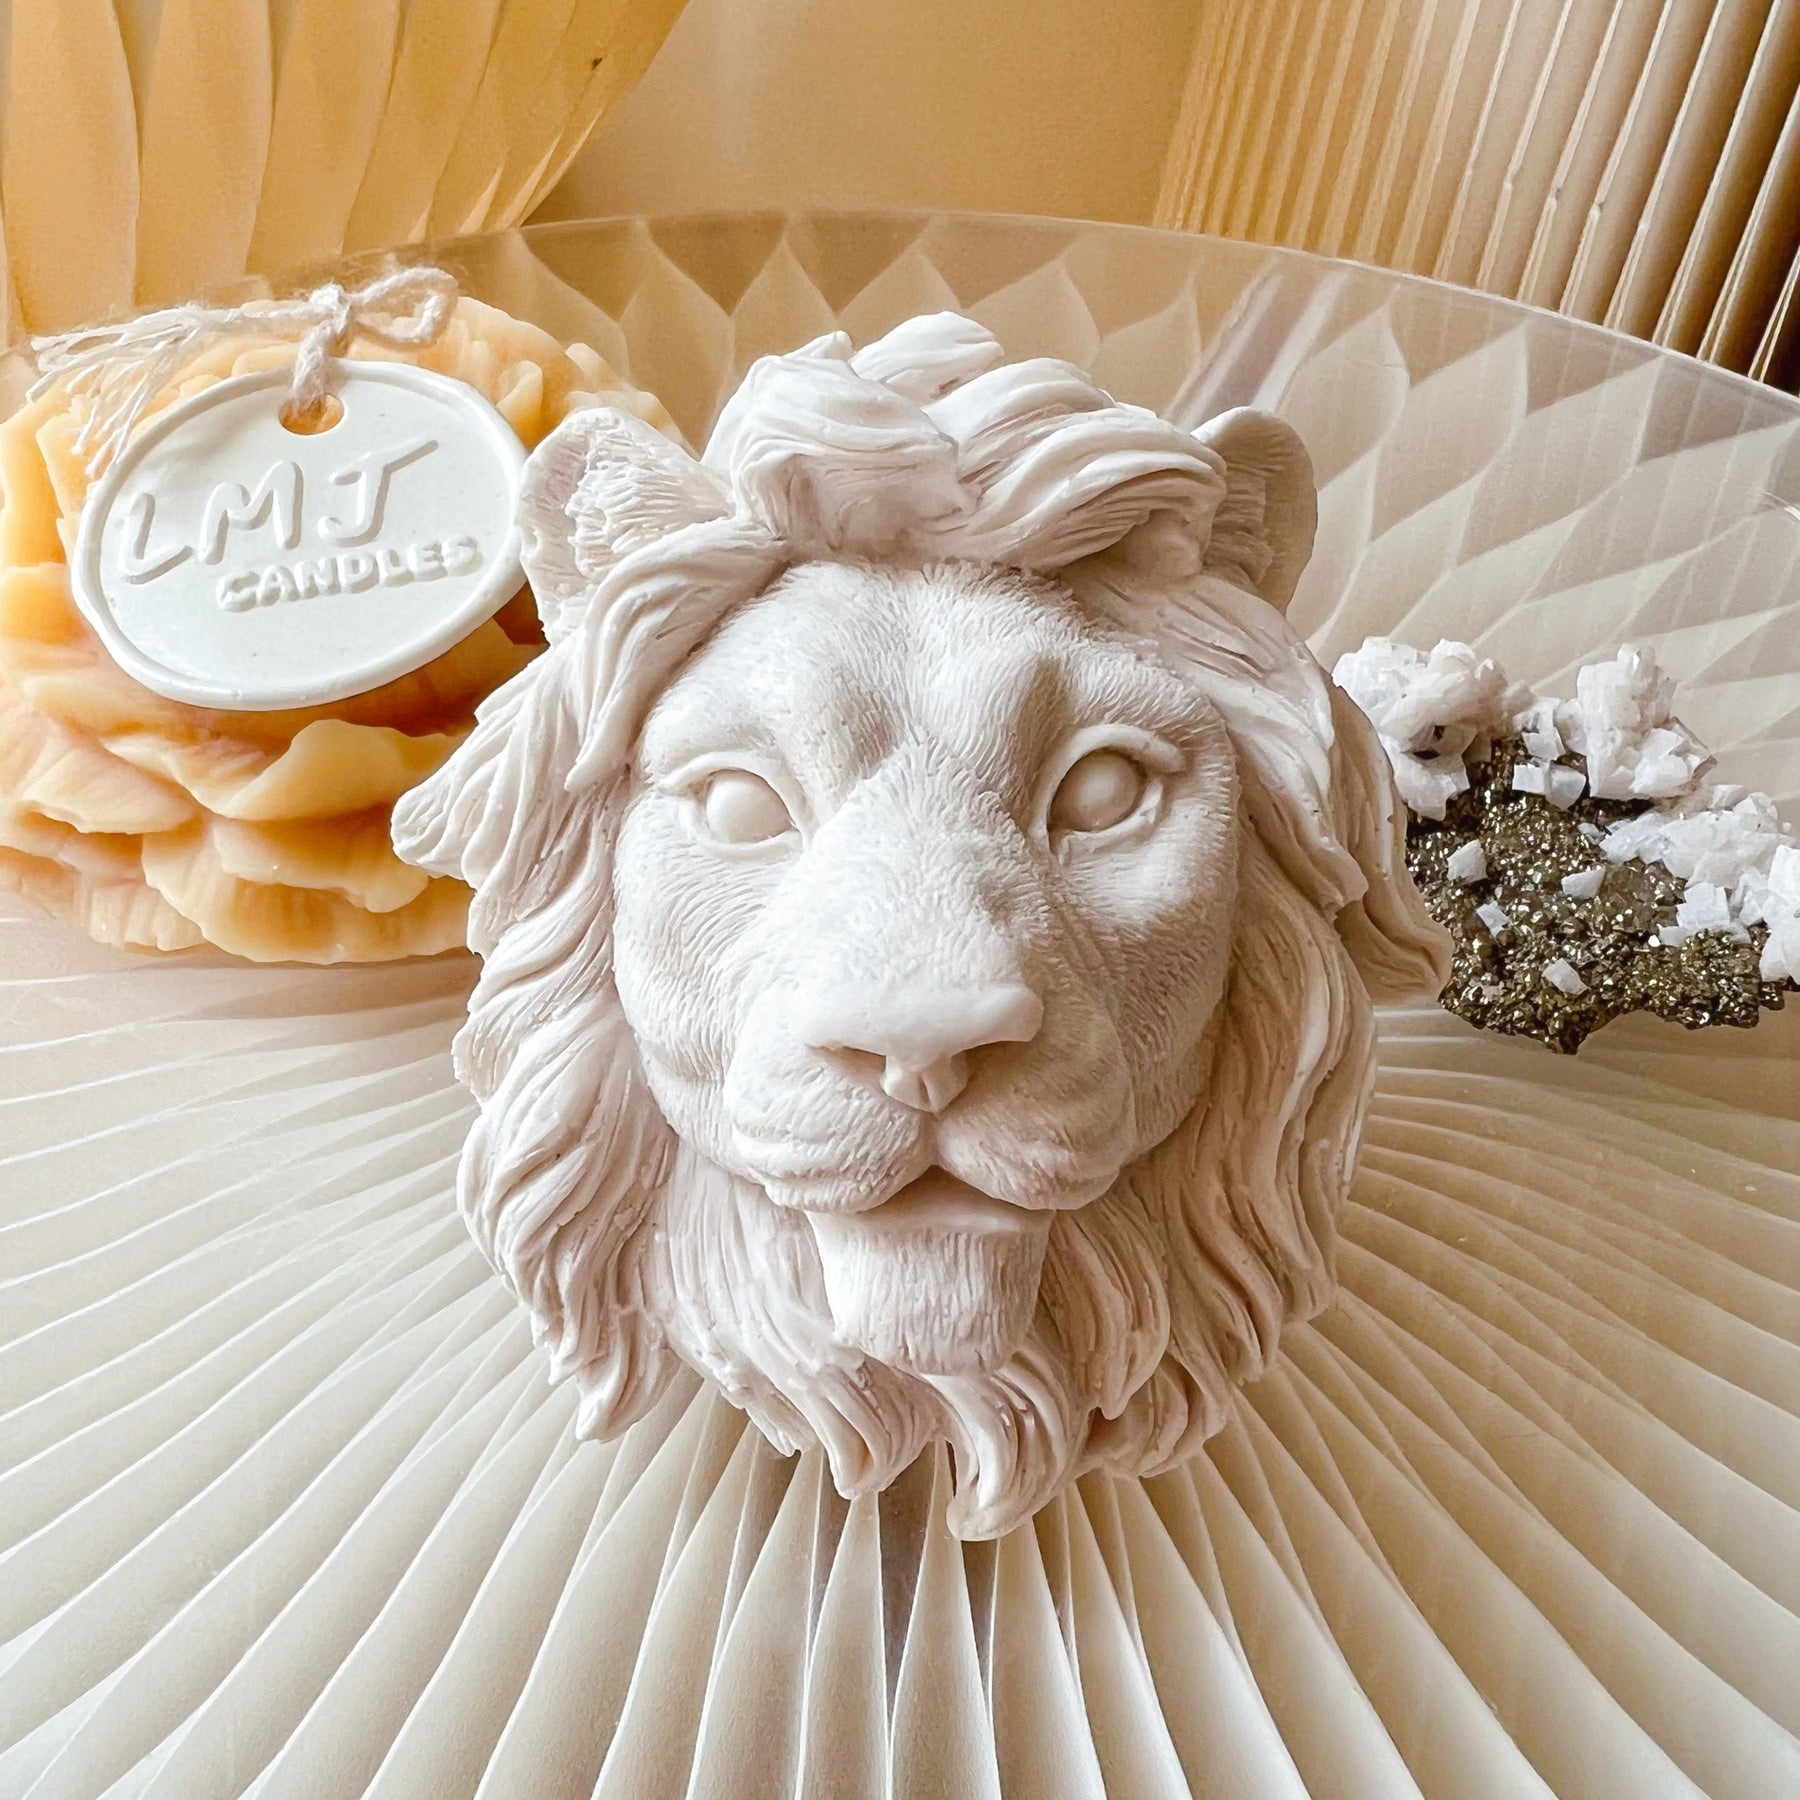 Lion Bust Air Freshener - Car Vent Clip Hanging Diffuser | LMJ Candles